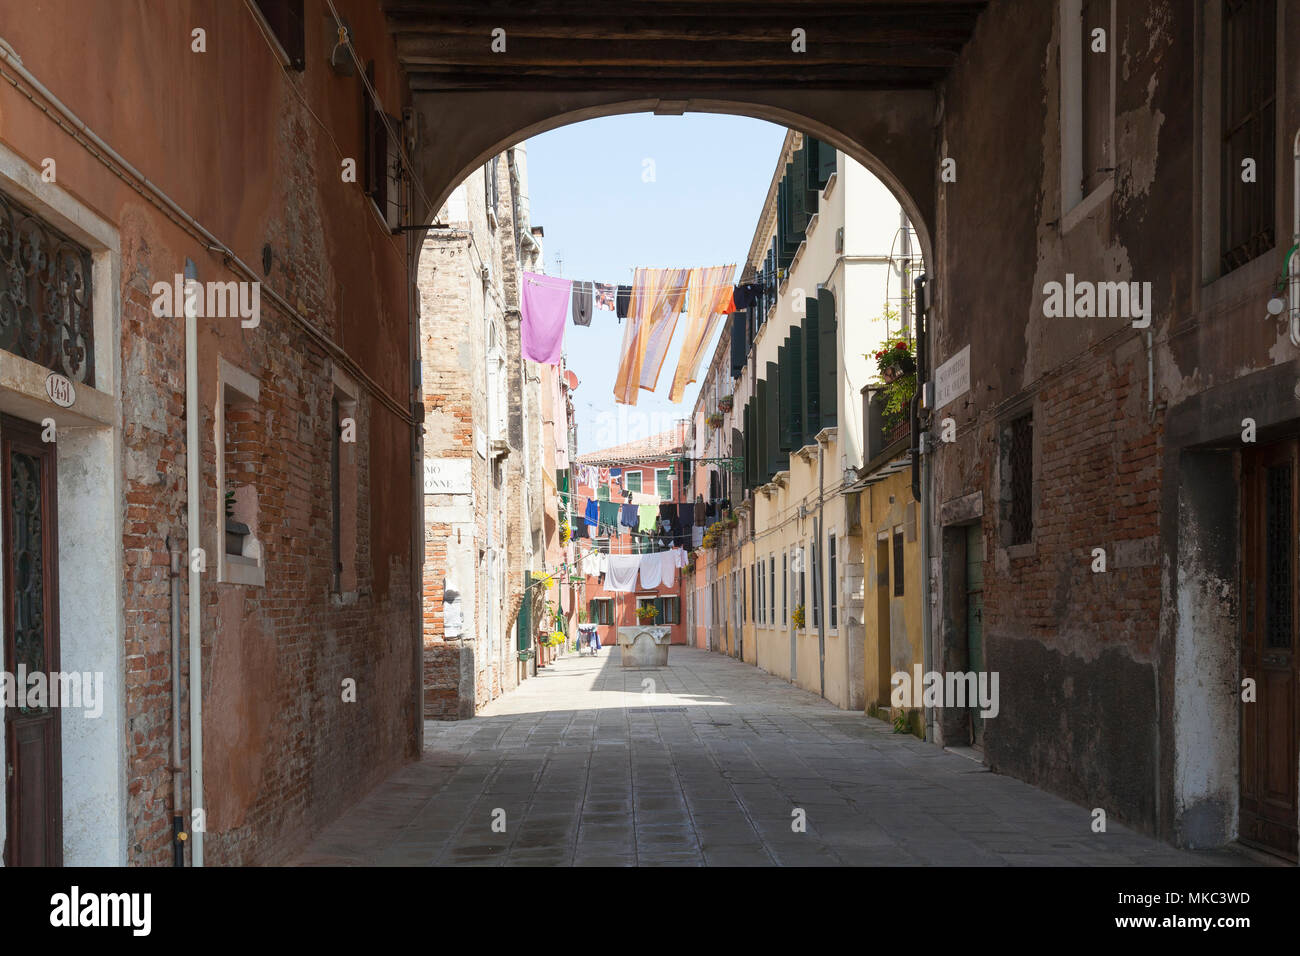 View through an arched  sotoportego (covered walkway) of washing hanging on lines on washday , Castello, Venice, Italy Stock Photo